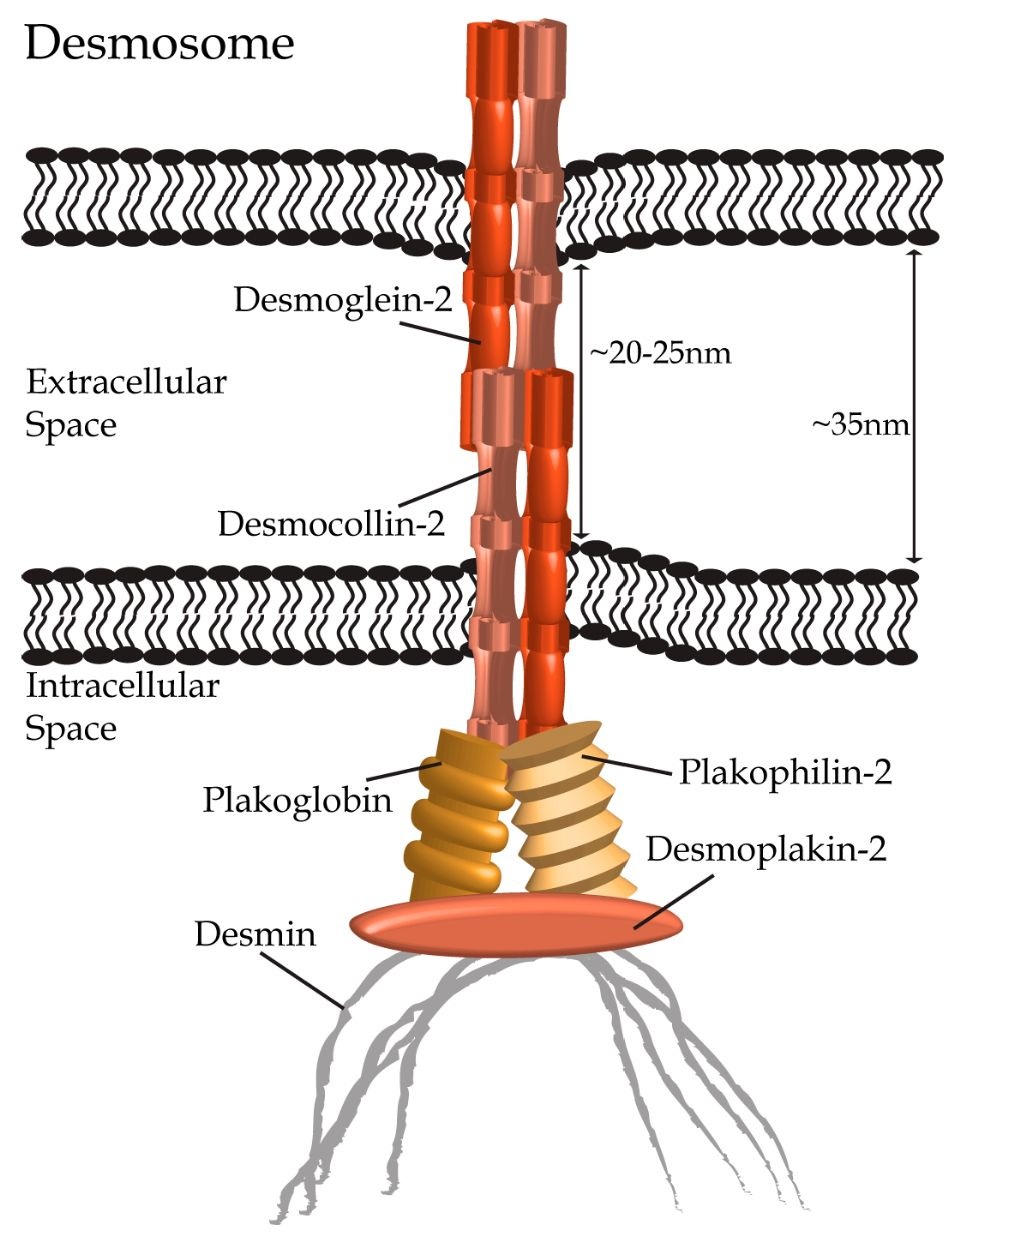 Desmosomes connect neighbouring cardiomyocytes through heterophilic dimers of desmocollin-2 and desmoglein-2 (shown in hues of orange) forming within the extracellular space. Interactions with plakophilin-2, plakoglobin (a.k.a. y-catenin) and desmoplakin-1 (depicted in hues of gold and orange) link the desmosomal complex to the intermediate filament protein desmin (shown in gray) in cardiomyocytes.